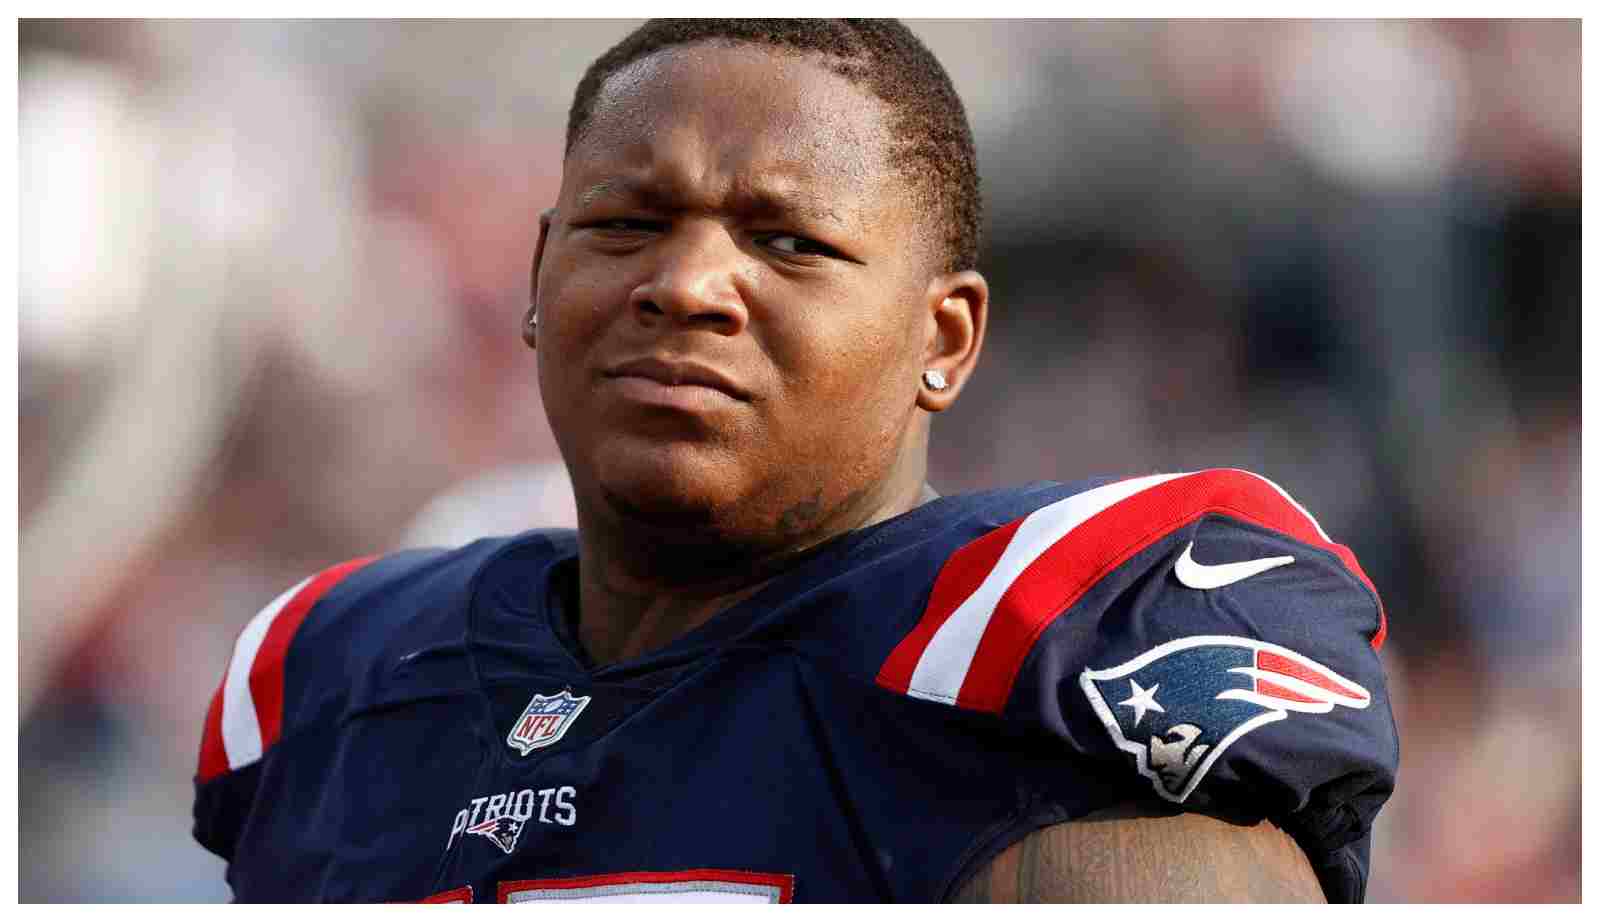 Trent Brown: Career stats, height, weight, family, college, teams ...